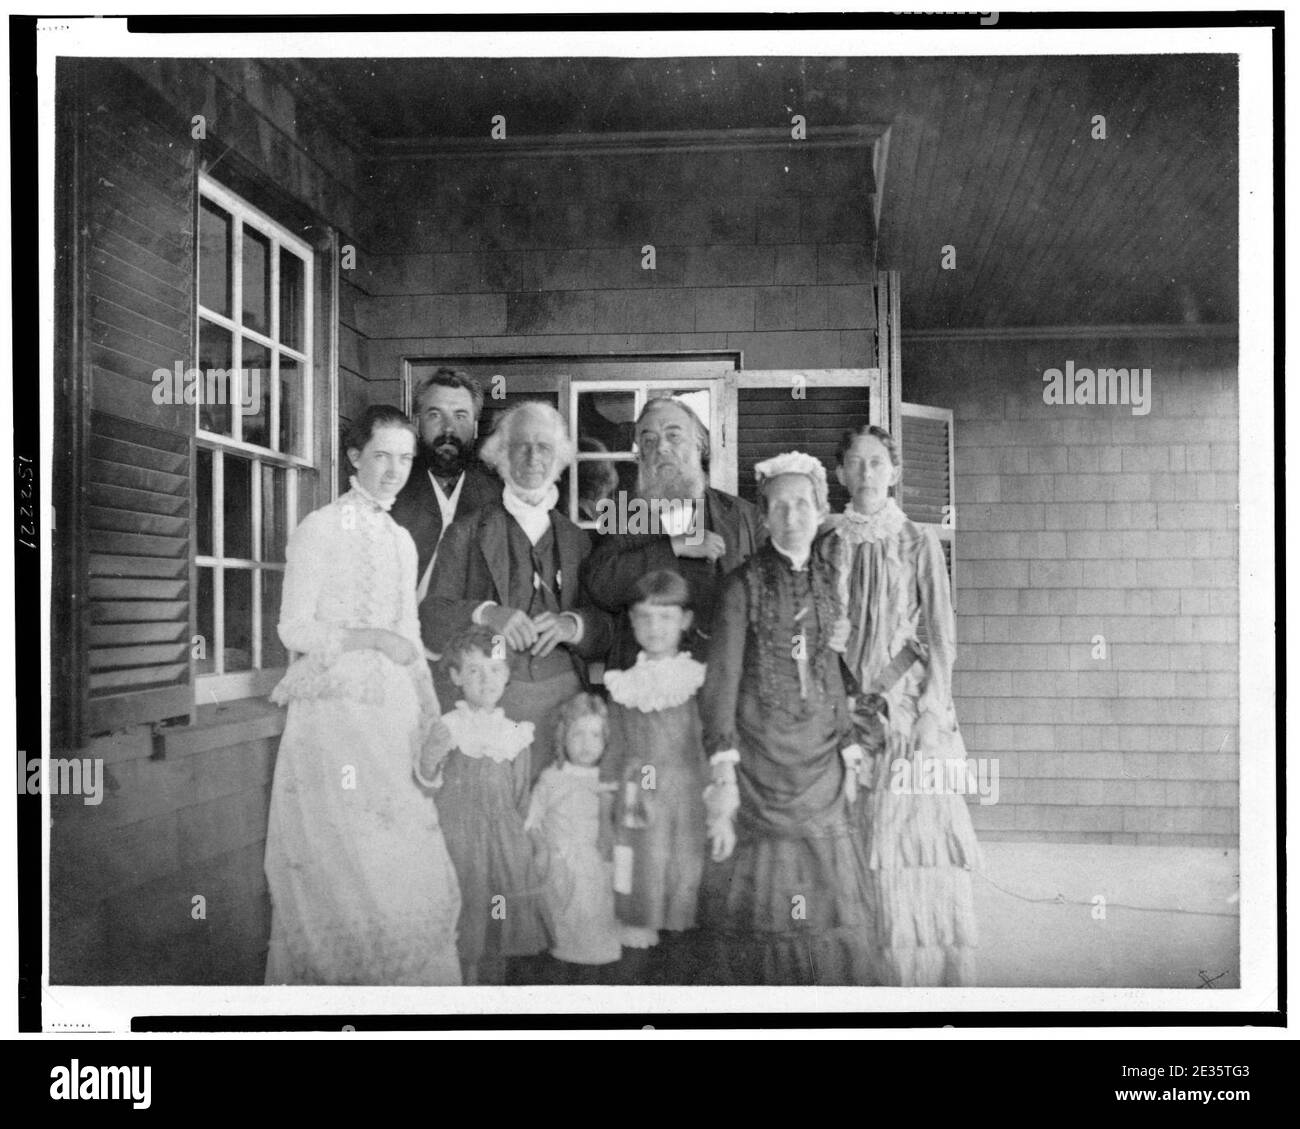 Mabel Hubbard Bell, Alexander Graham Bell, Dr. Bartol, Alexander Melville Bell, Eliza Grace Symonds, and Mary True with children, Daisy Bell, Gypsy Grossman, and Elsie Bell at the Hubbard Stock Photo